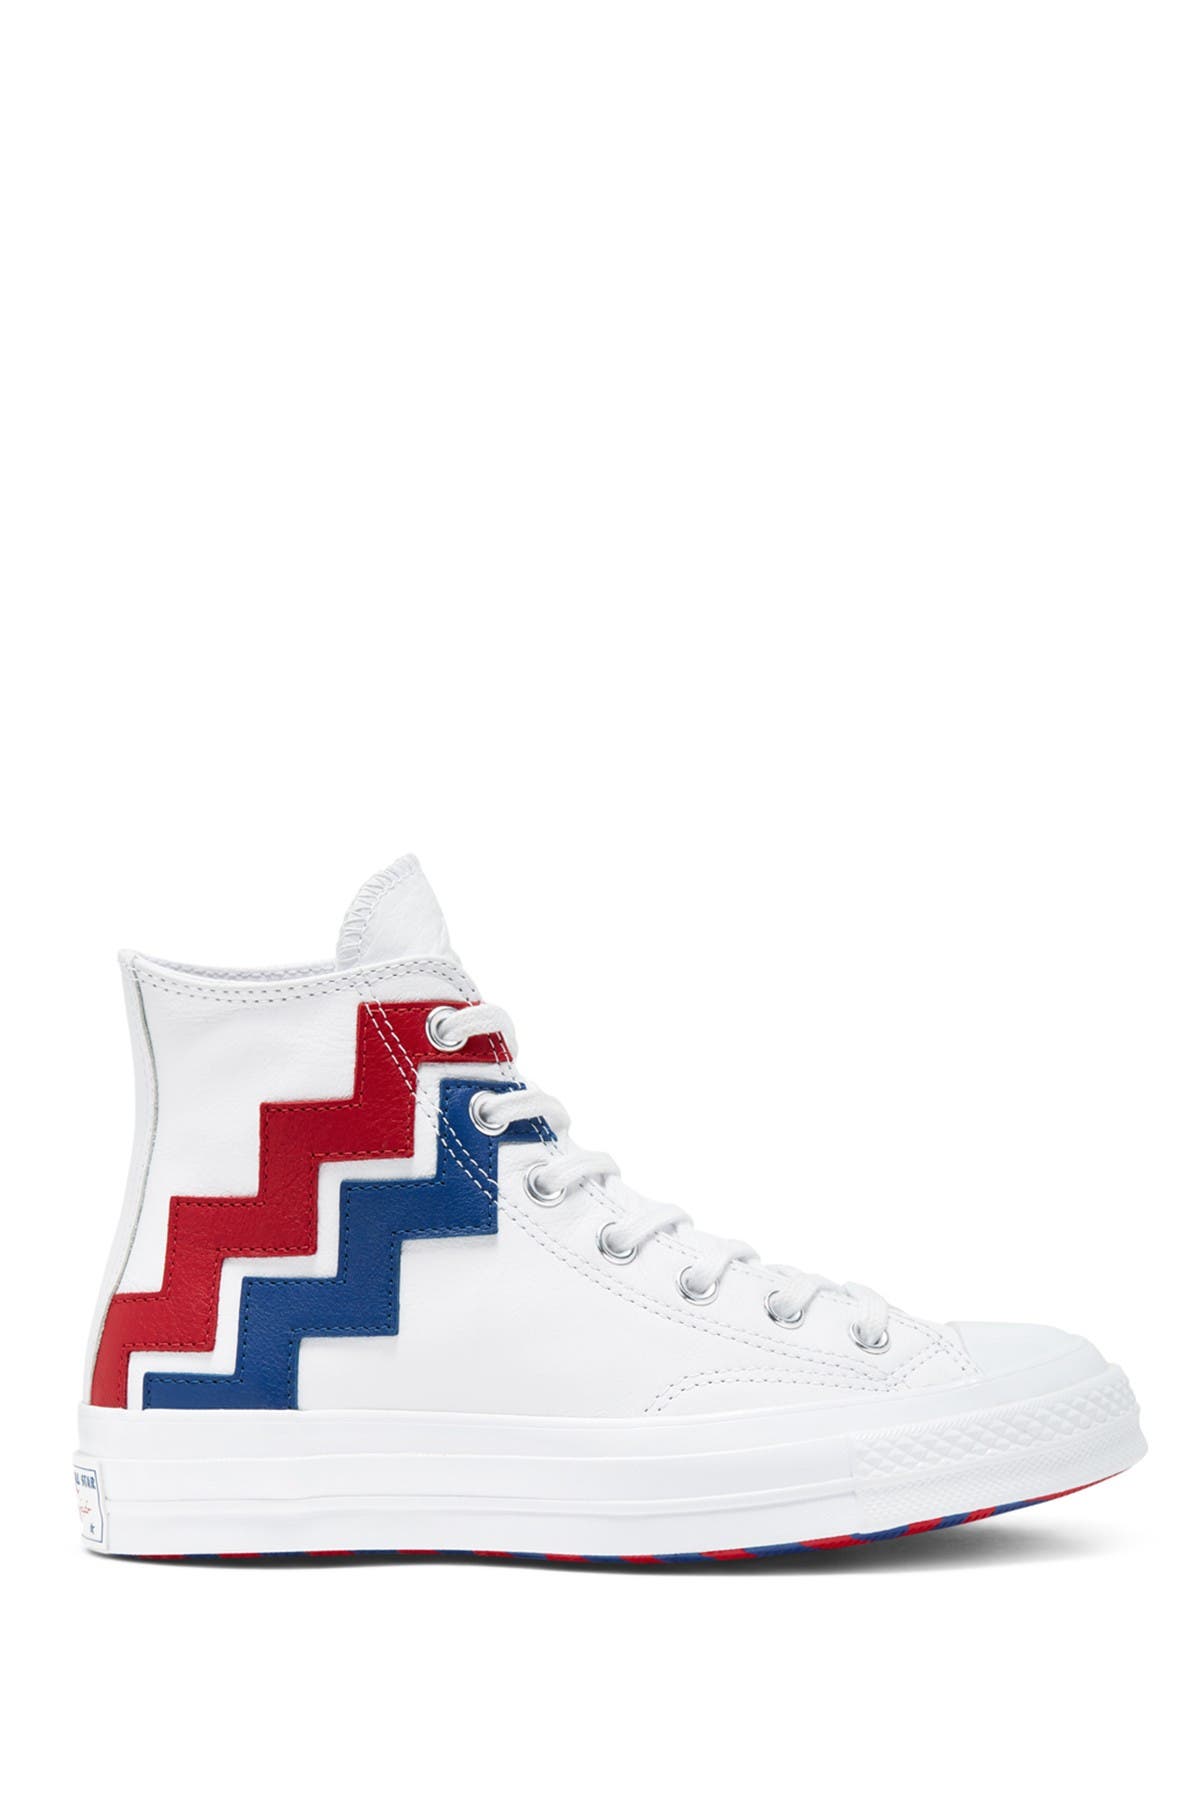 chuck 70 courtside style